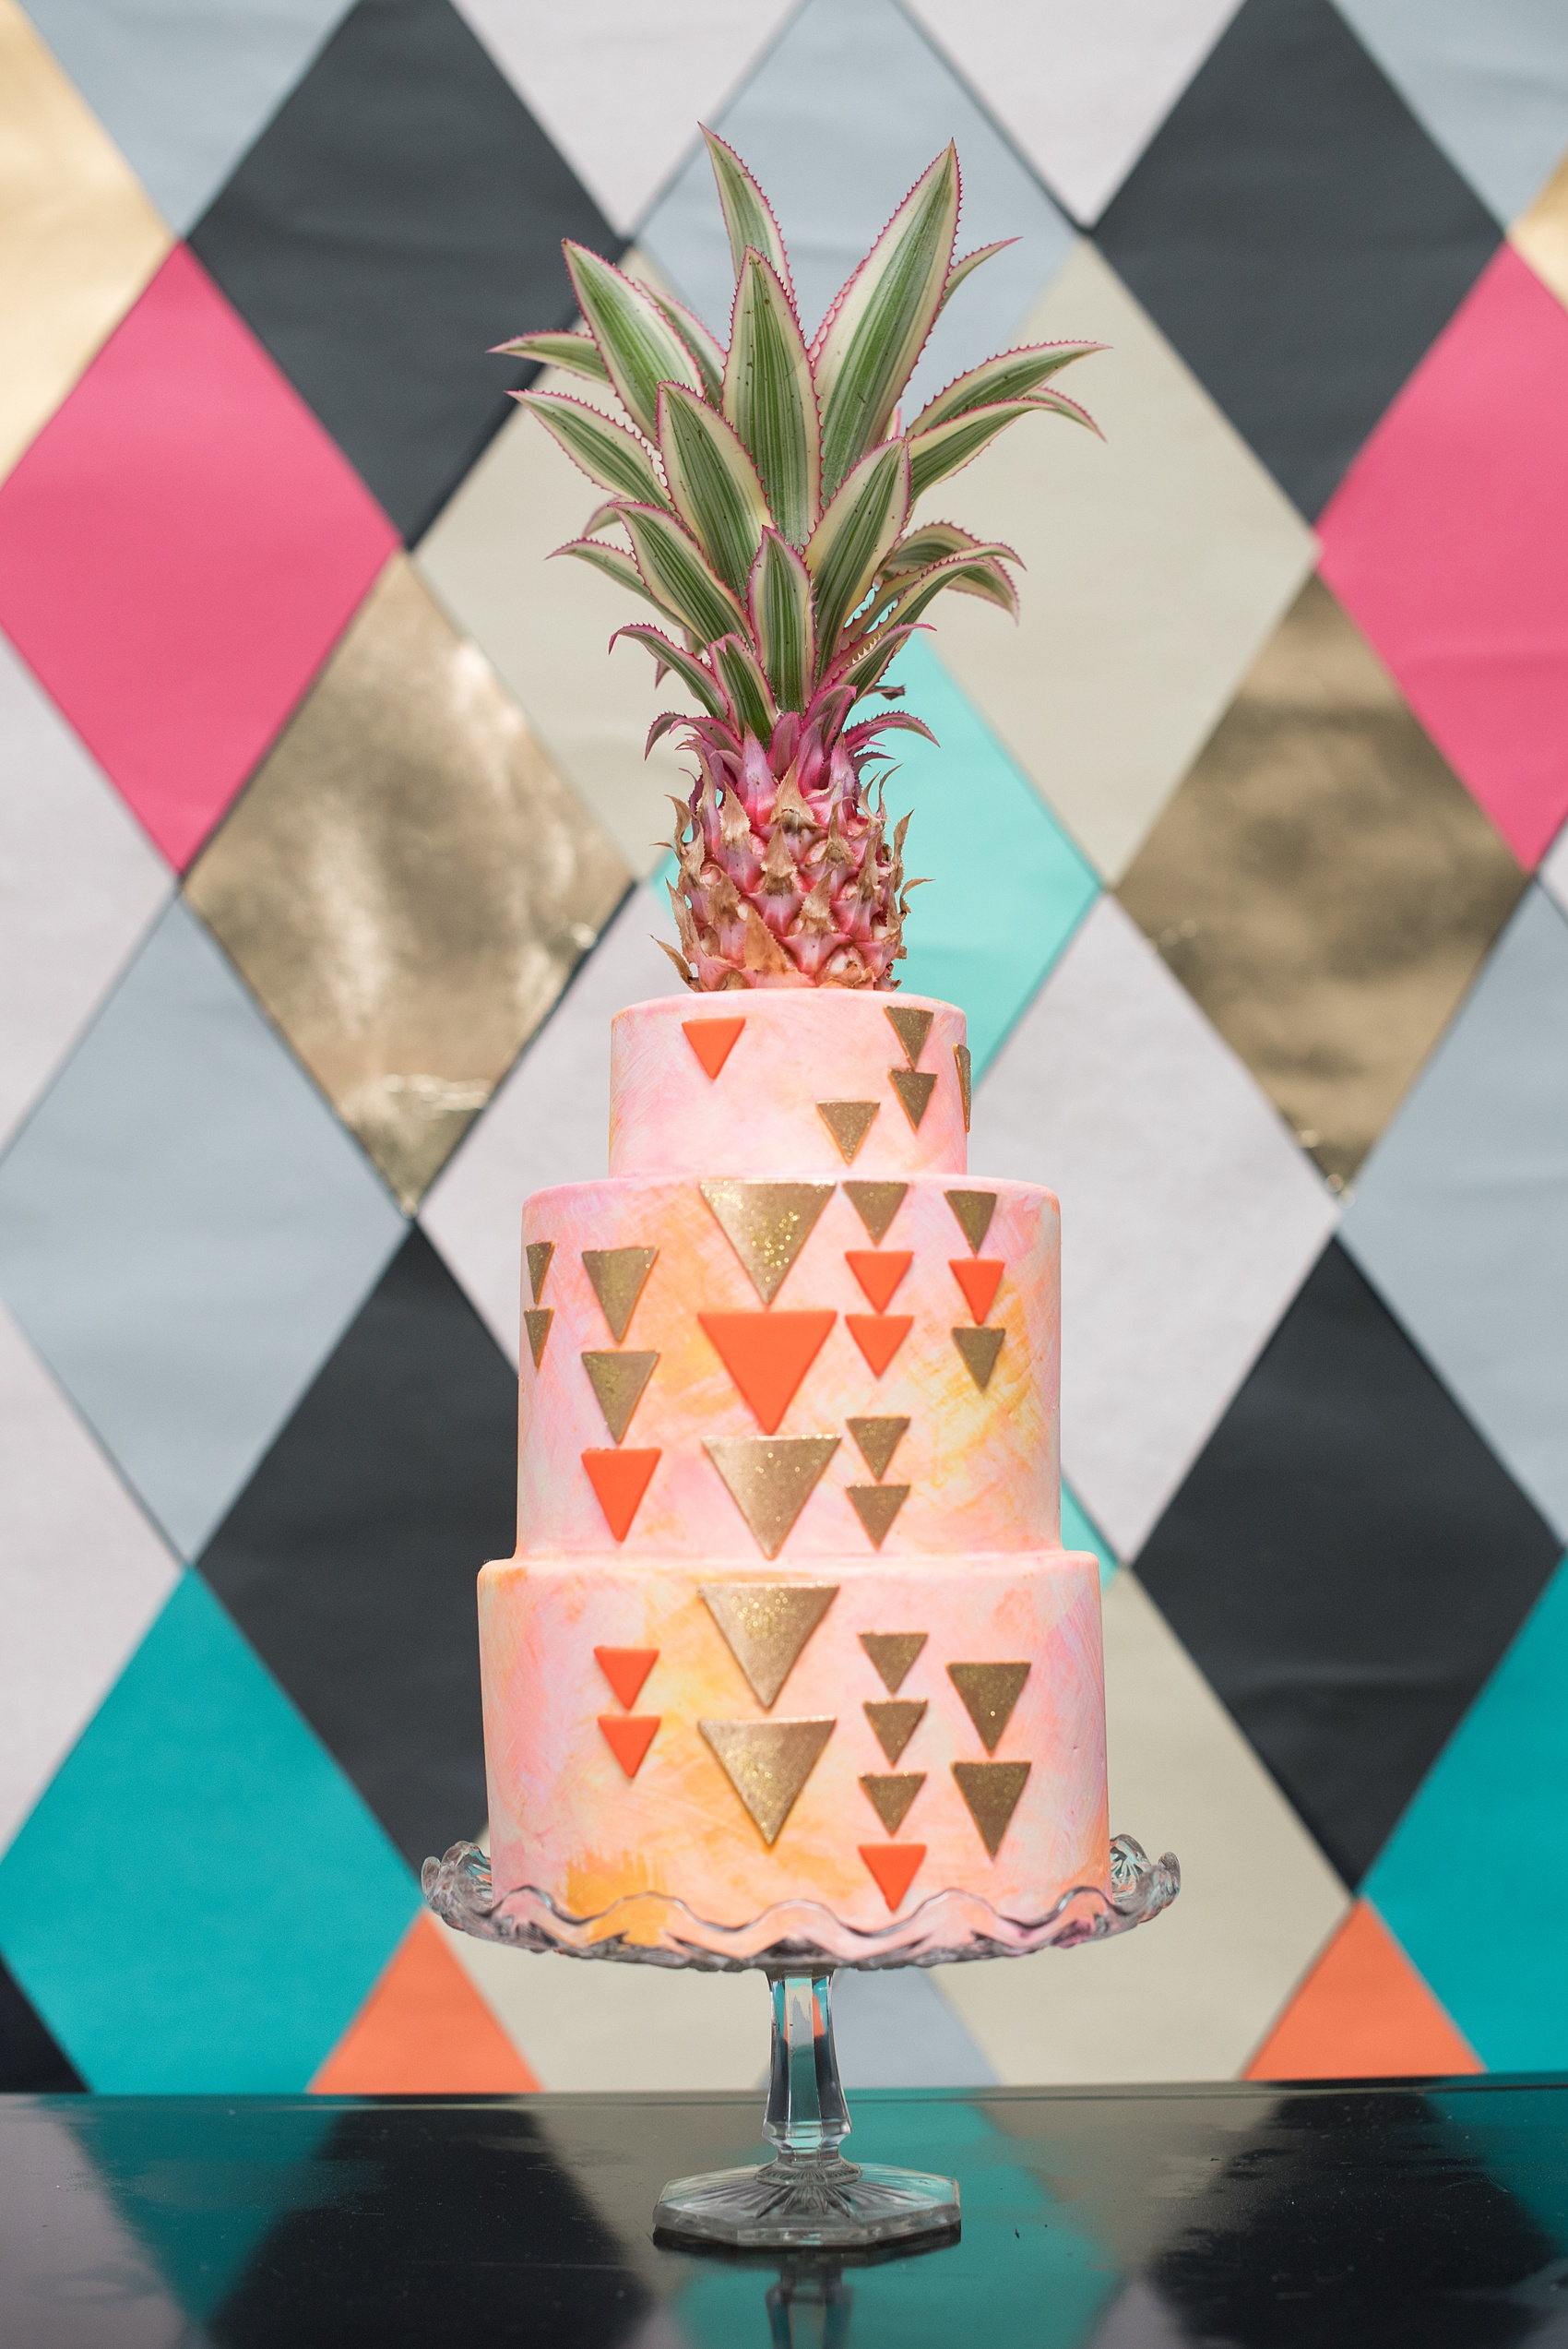 Palm Springs wedding photos for inspiration and ideas for a colorful Mid-Century modern look. Photos by Mikkel Paige Photography, NYC photographer. A custom dessert by Lael Cakes had neon orange details and gold glitter fondant triangles, topped with a pineapple. Click through to see more! Planning by Color Pop Events for a shoot with Love Inc. Mag. #PalmSpringsInspiration #PalmSpringsWedding #Midcenturymodern #customcake #tropicalweddingcake #pineappletopper #minipineapple